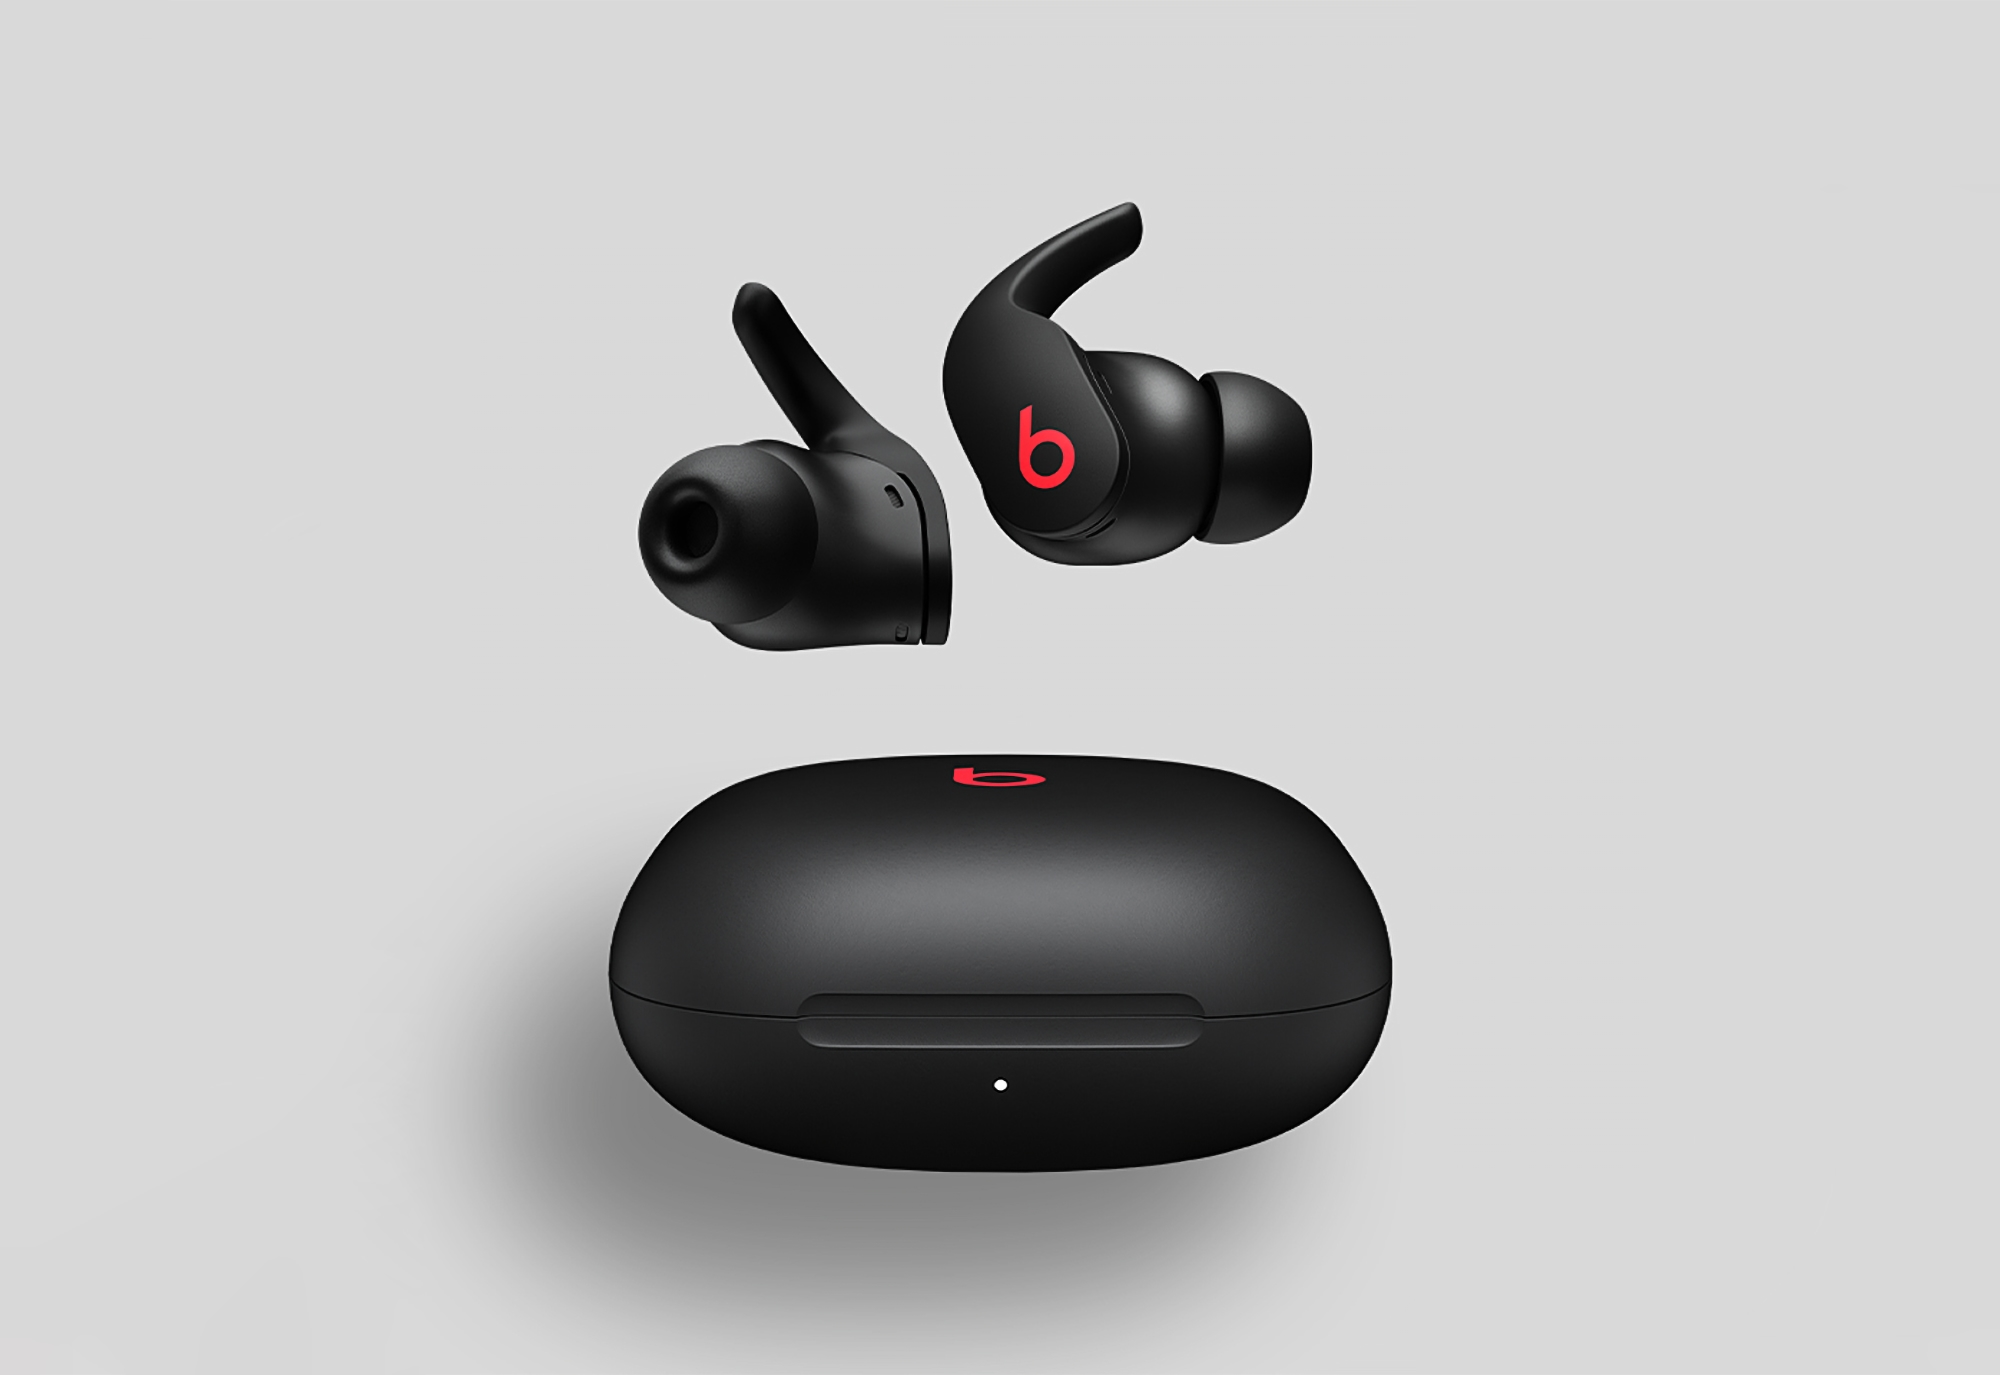 $40 off: Beats Fit Pro with ANC, IPX4 protection and AirPods Pro-like chip on sale on Amazon for $159